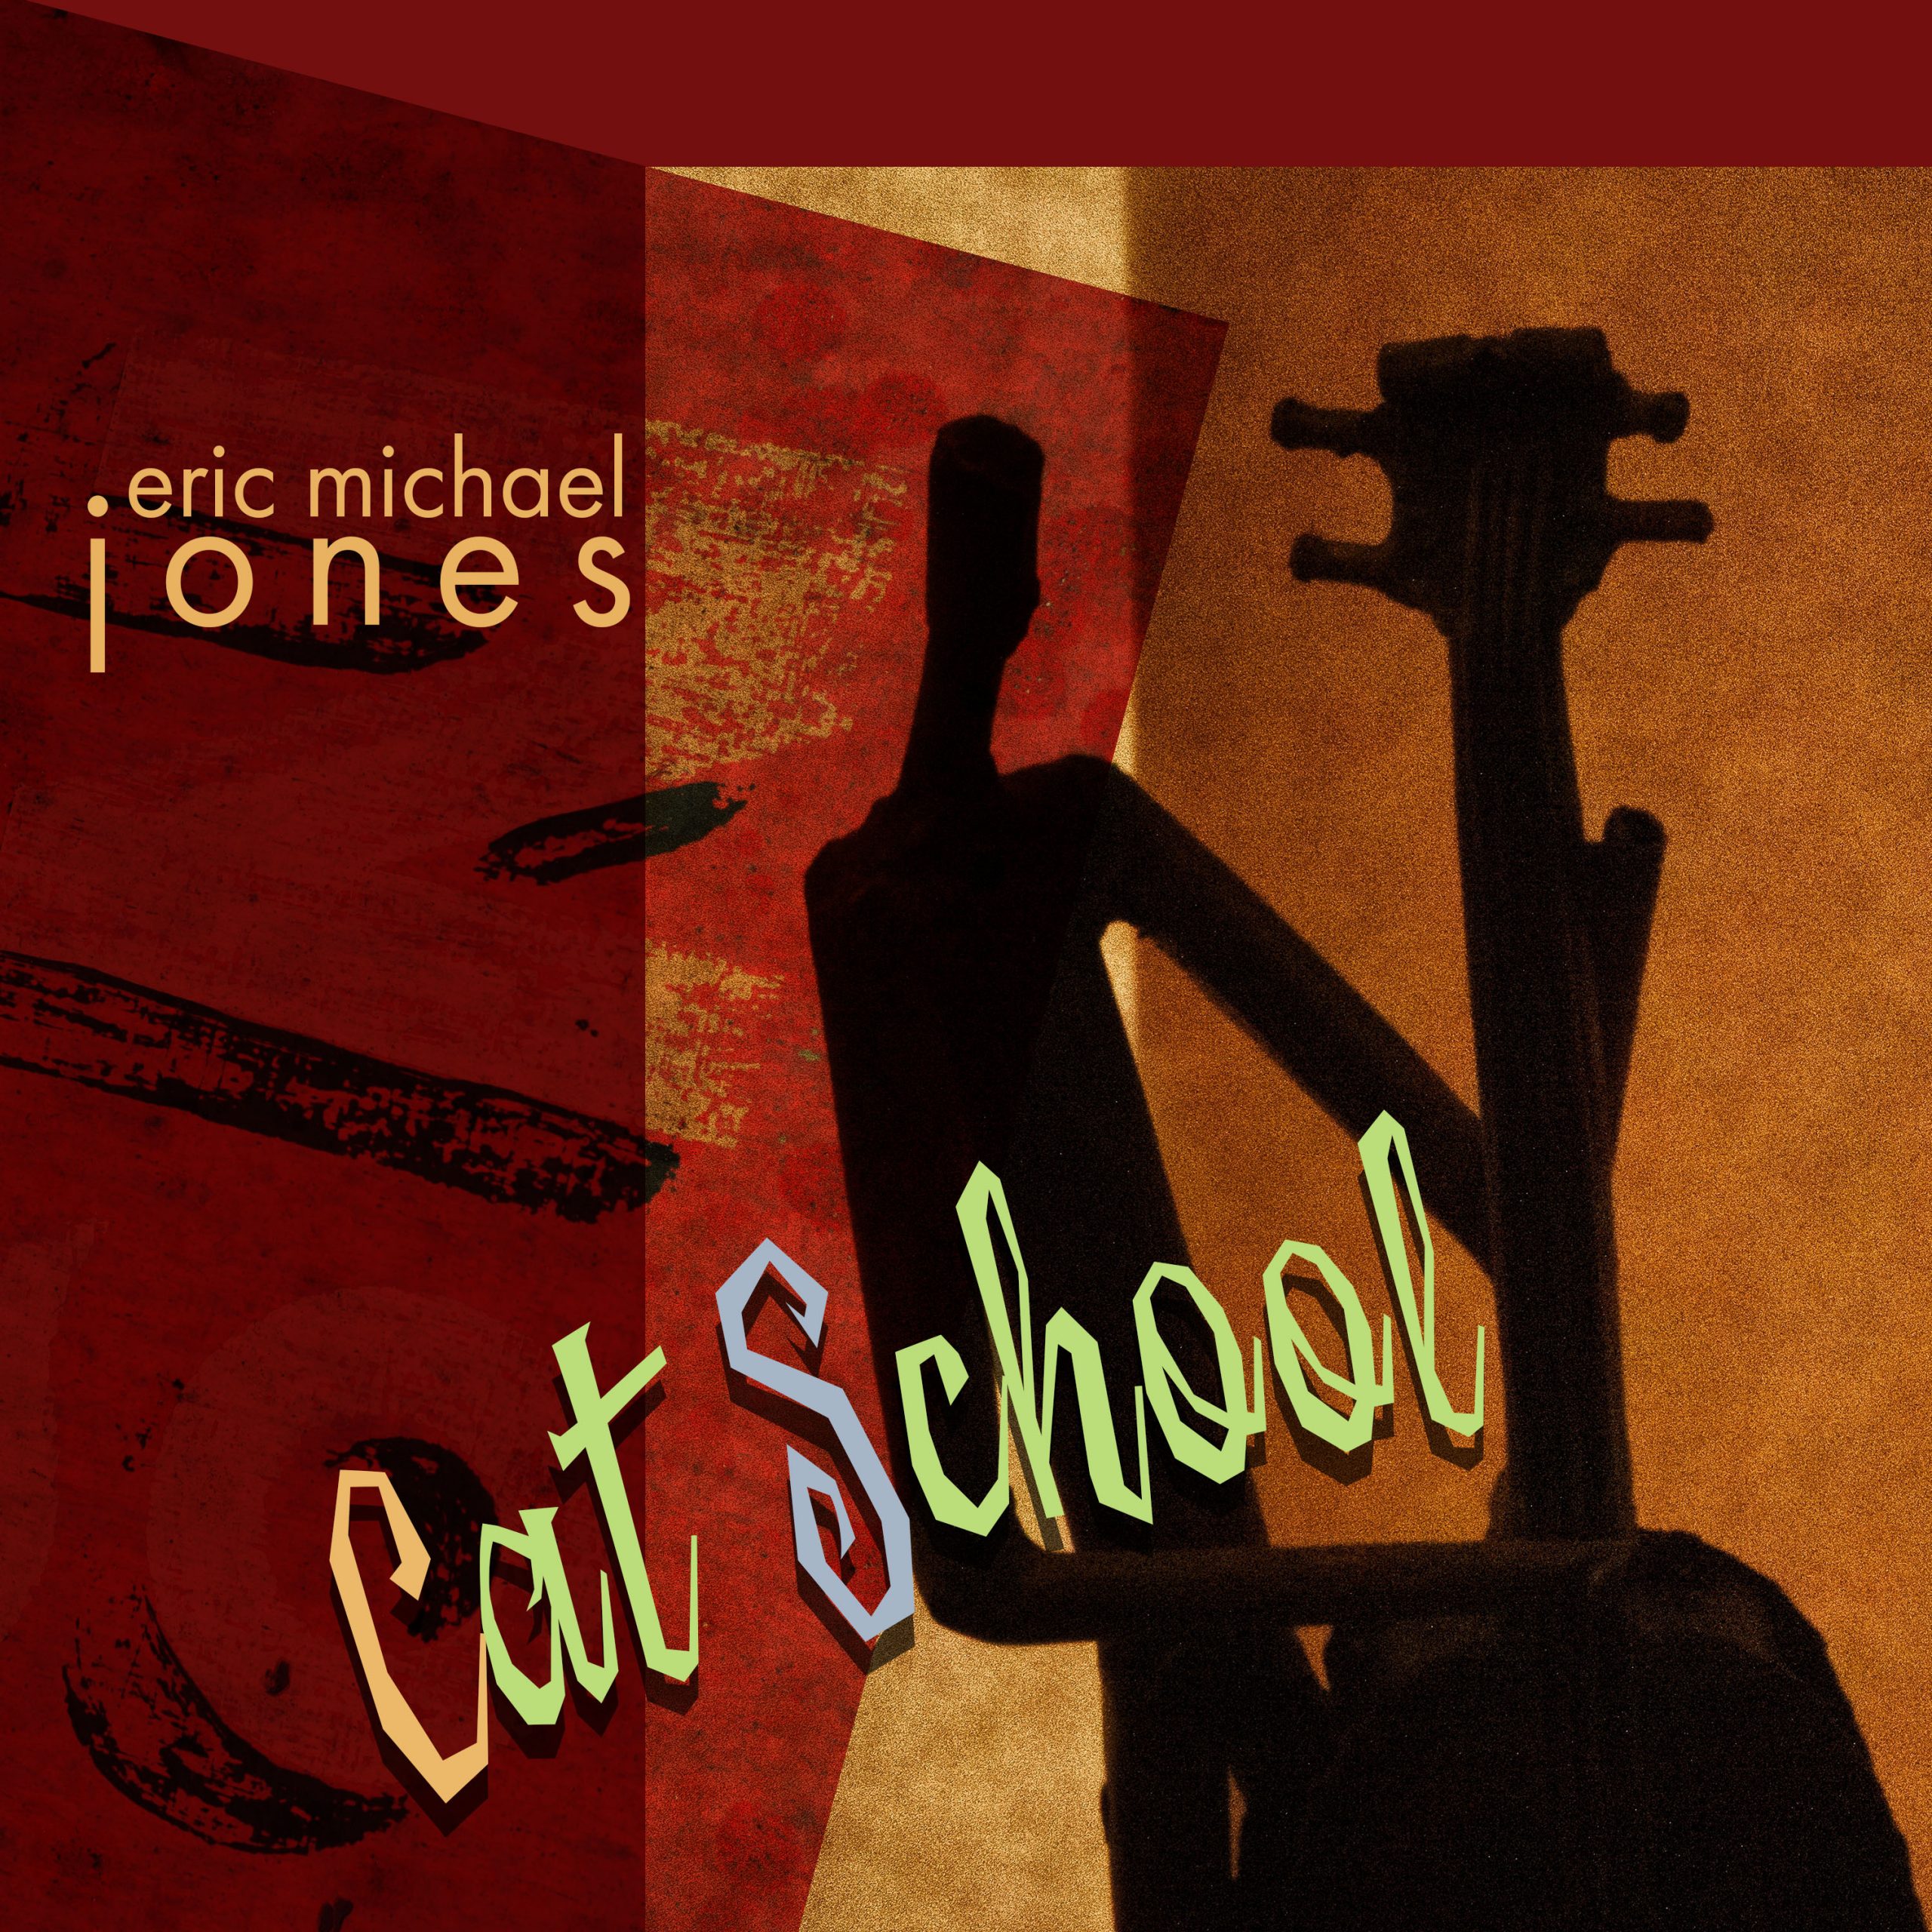 Cover rt for Cat School, showing a graphic of a bass musician